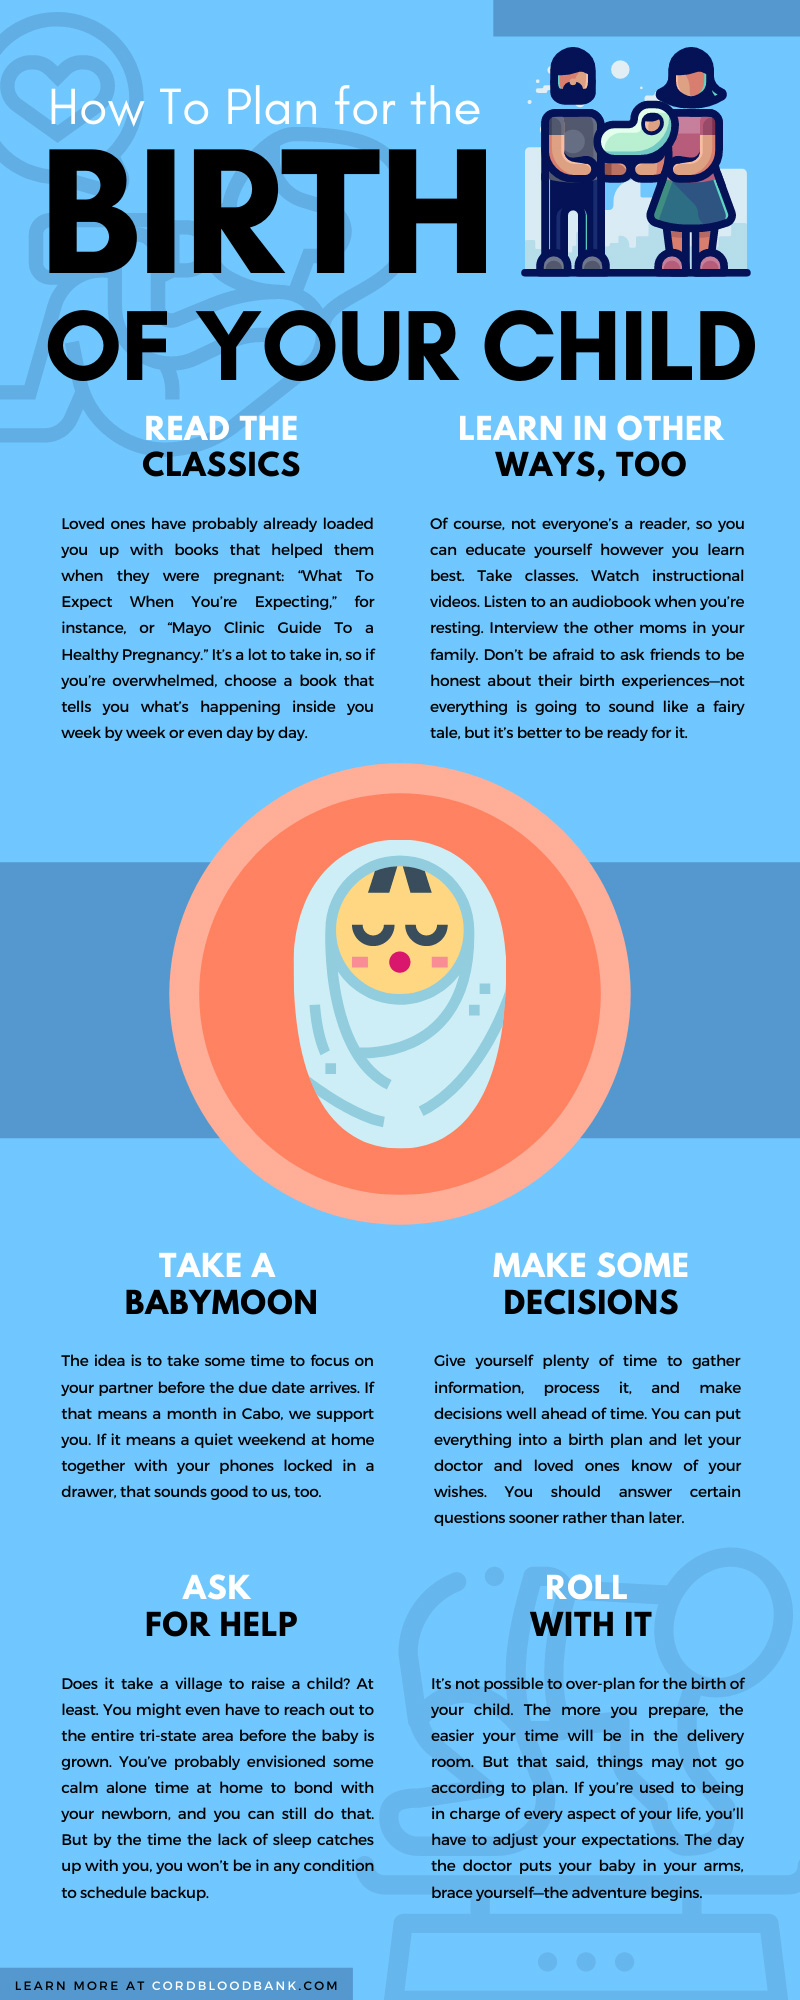 How To Plan For the Birth of Your Child